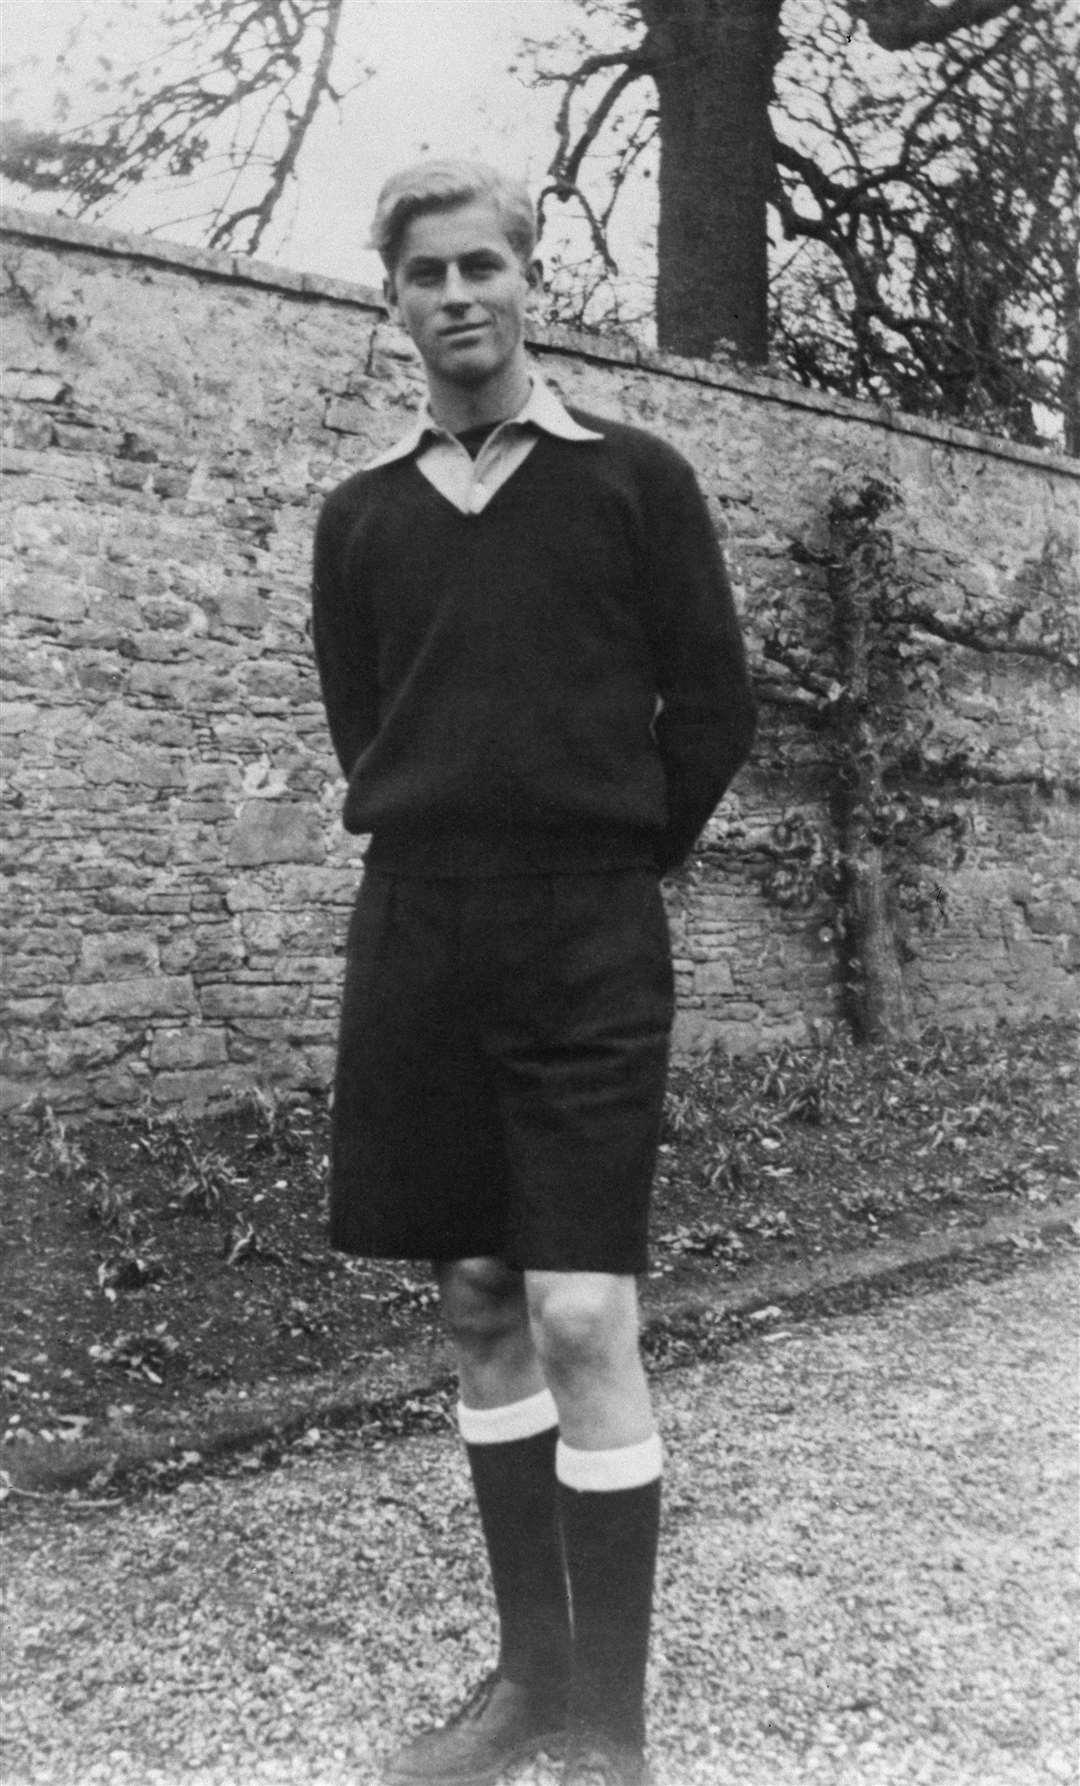 Prince Philip of Greece, as he was then known, at Gordonstoun (PA)